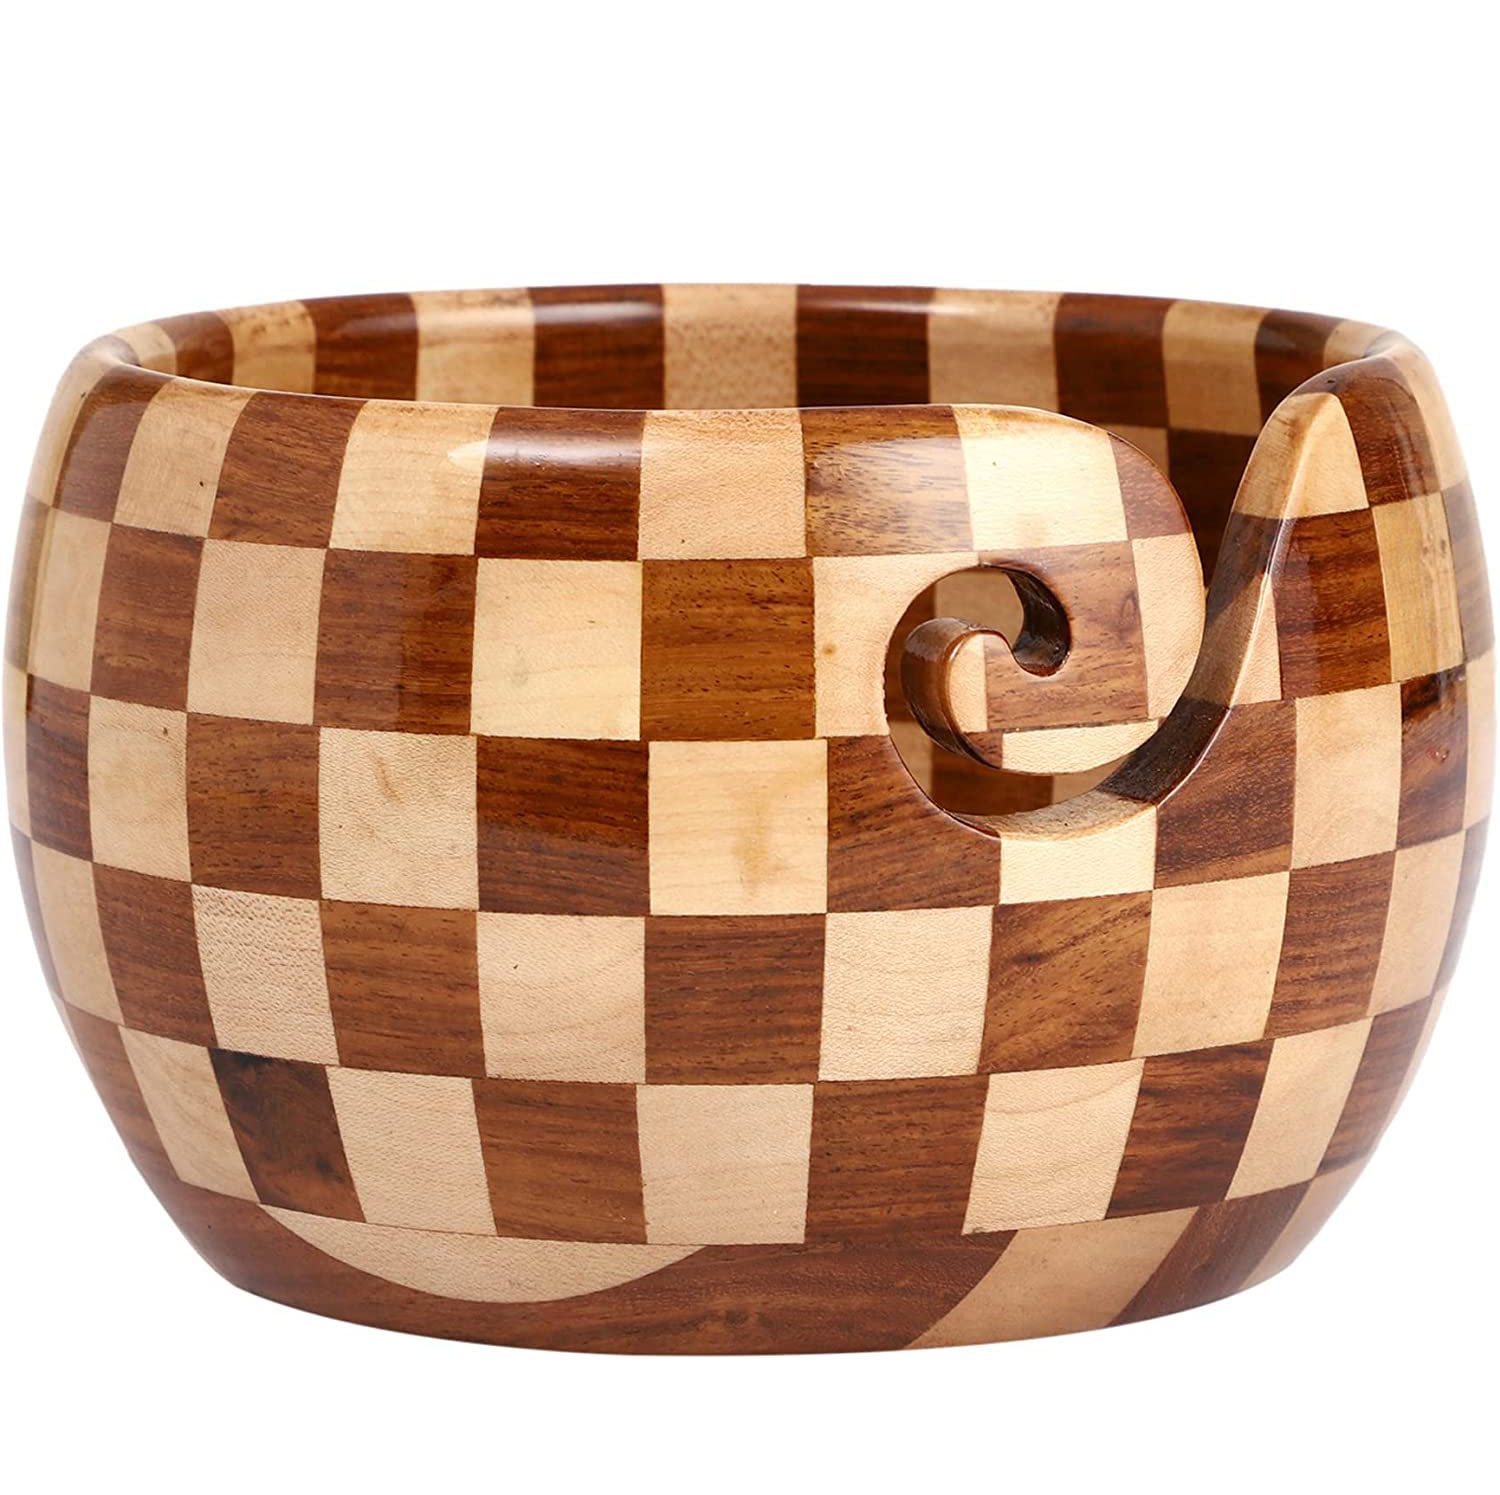 Natural Handcrafted Yarn Bowl for Knitting | Premium Wood Bowl for Yarn with Gorgeous Pattern | Knitting & Crochet Accessories , Home decor ideas